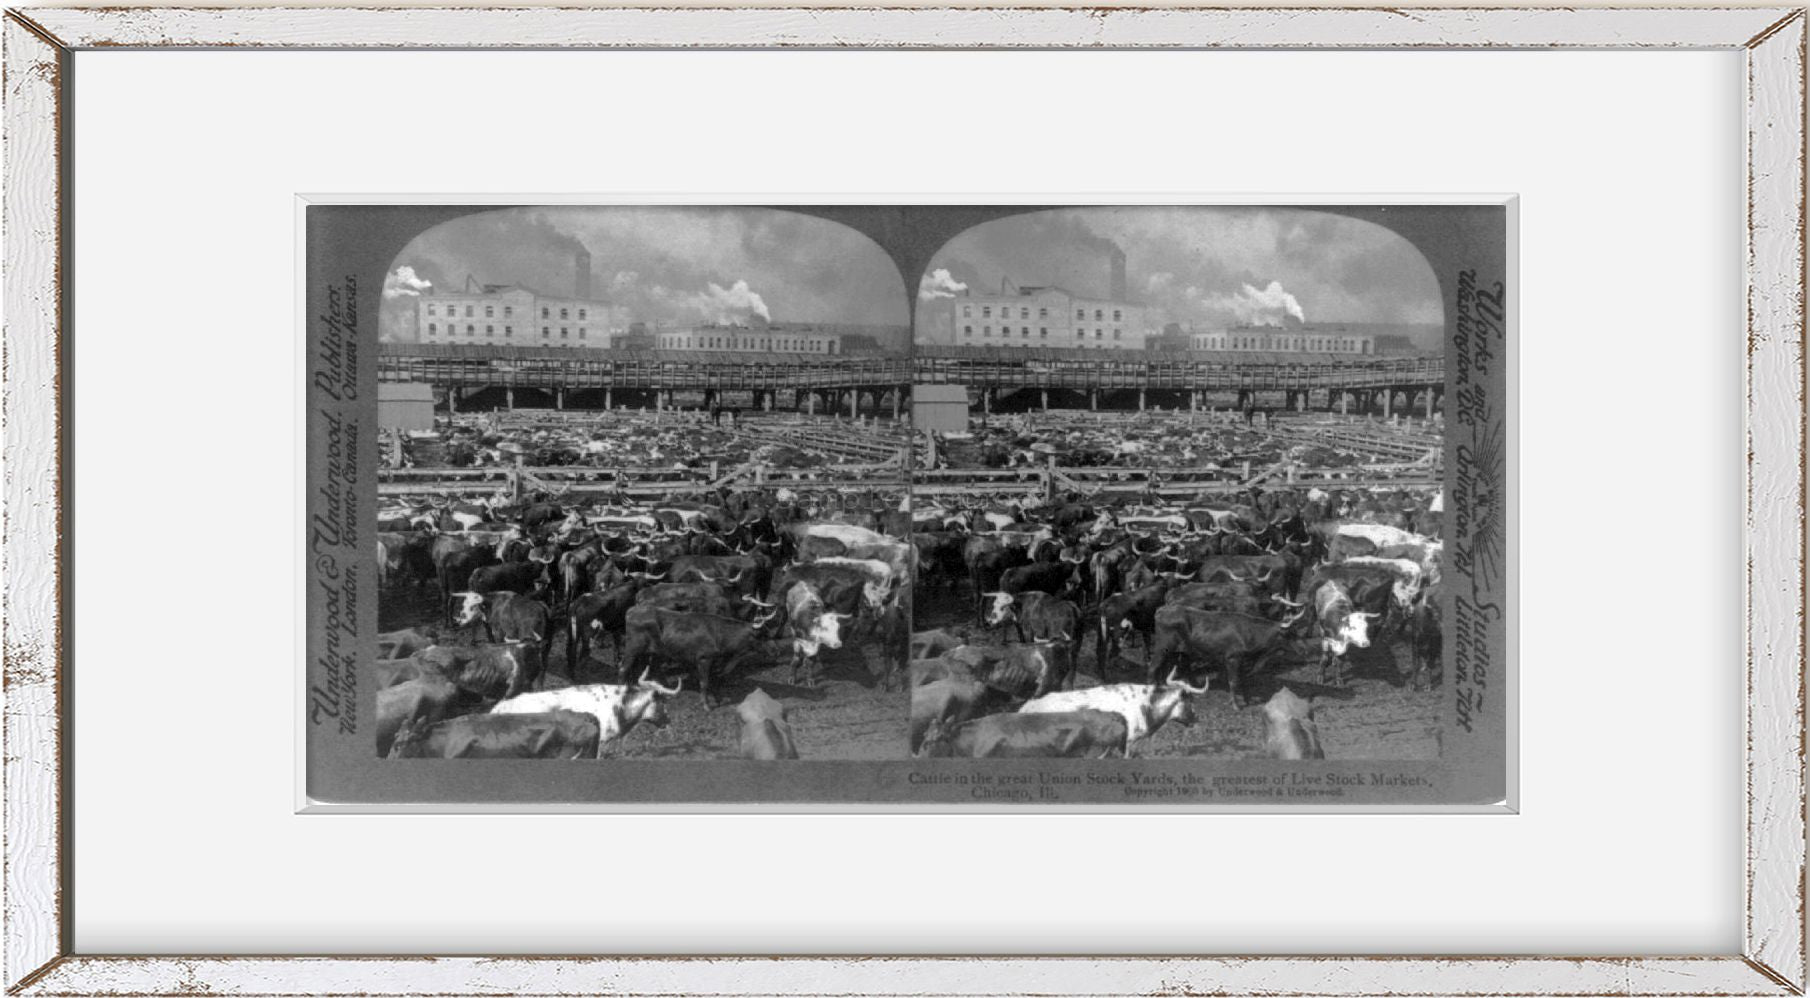 Photo: Reproduction, Cattle, Great Union Stock Yards, Chicago, Illinois, Live Stock M